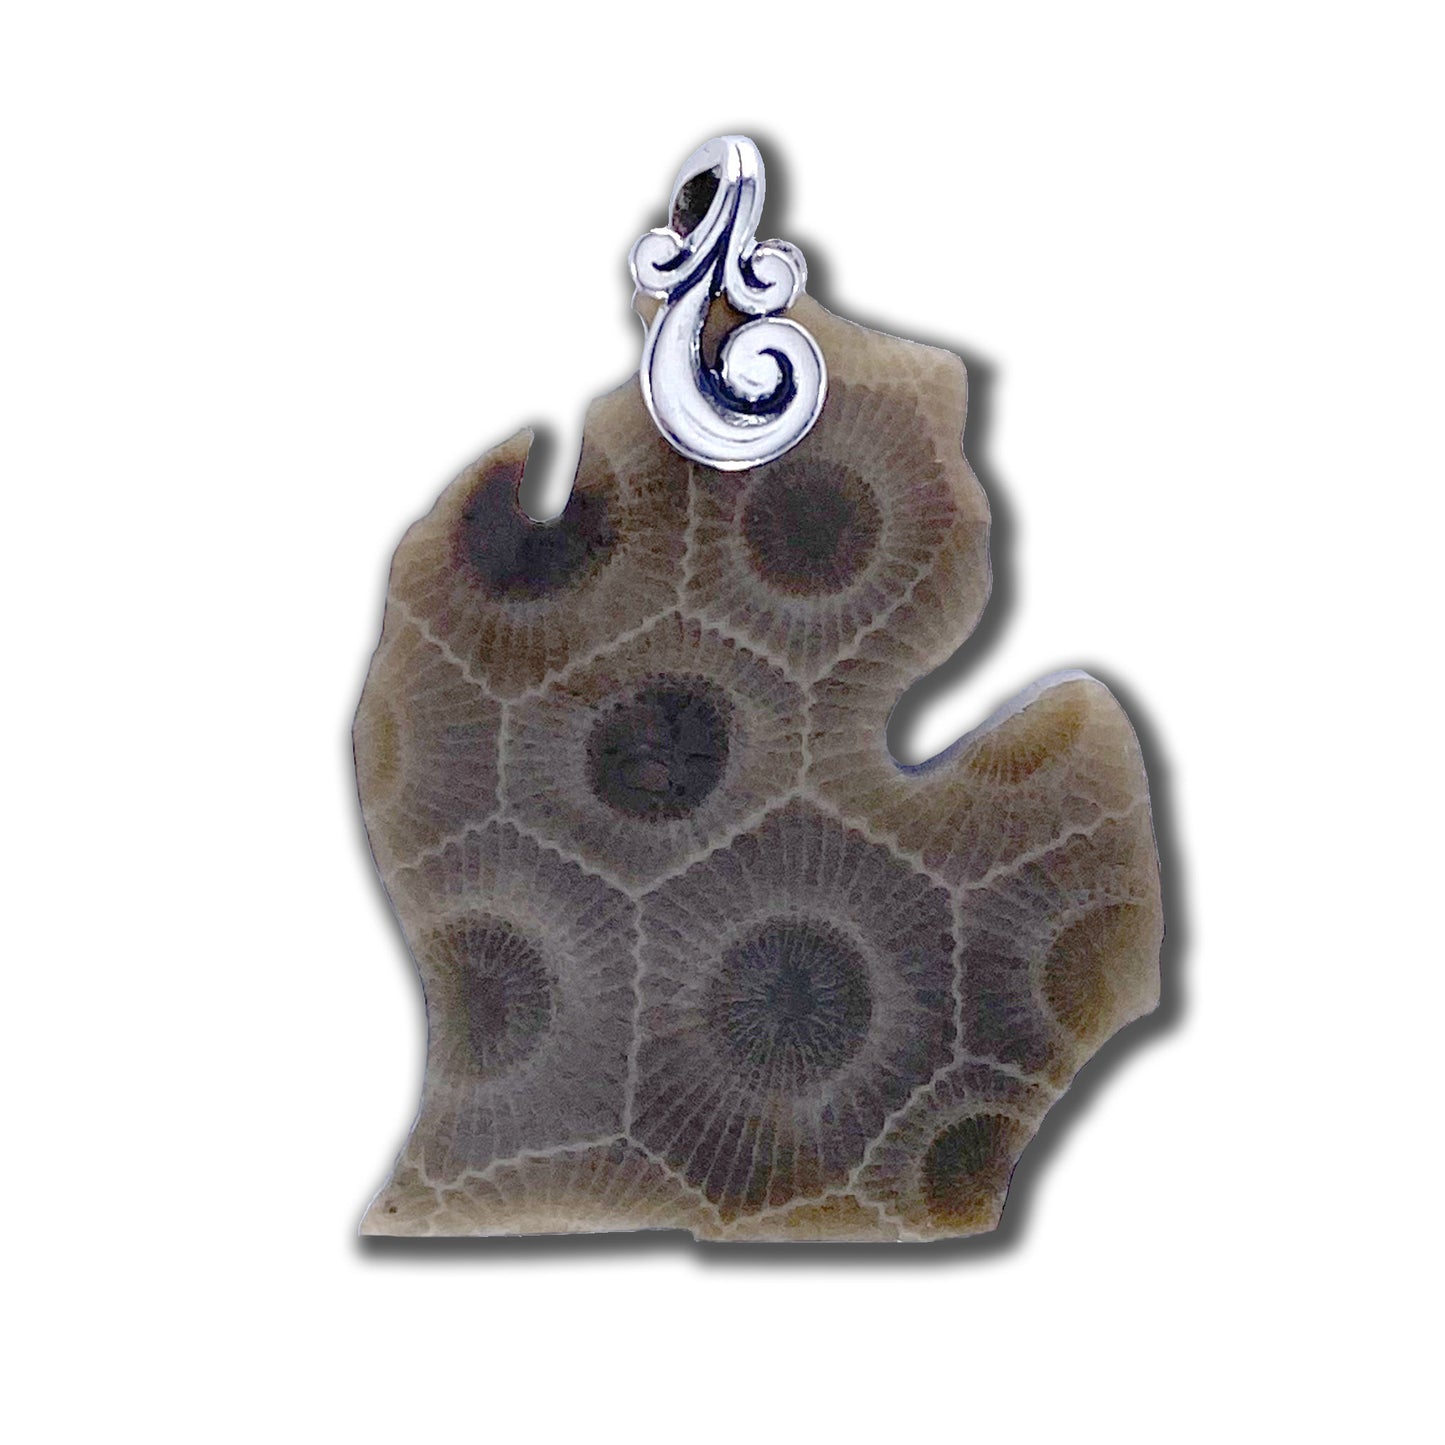 Michigan-Shaped Petoskey Stone Pendant Front View - Stone Treasures by the Lake